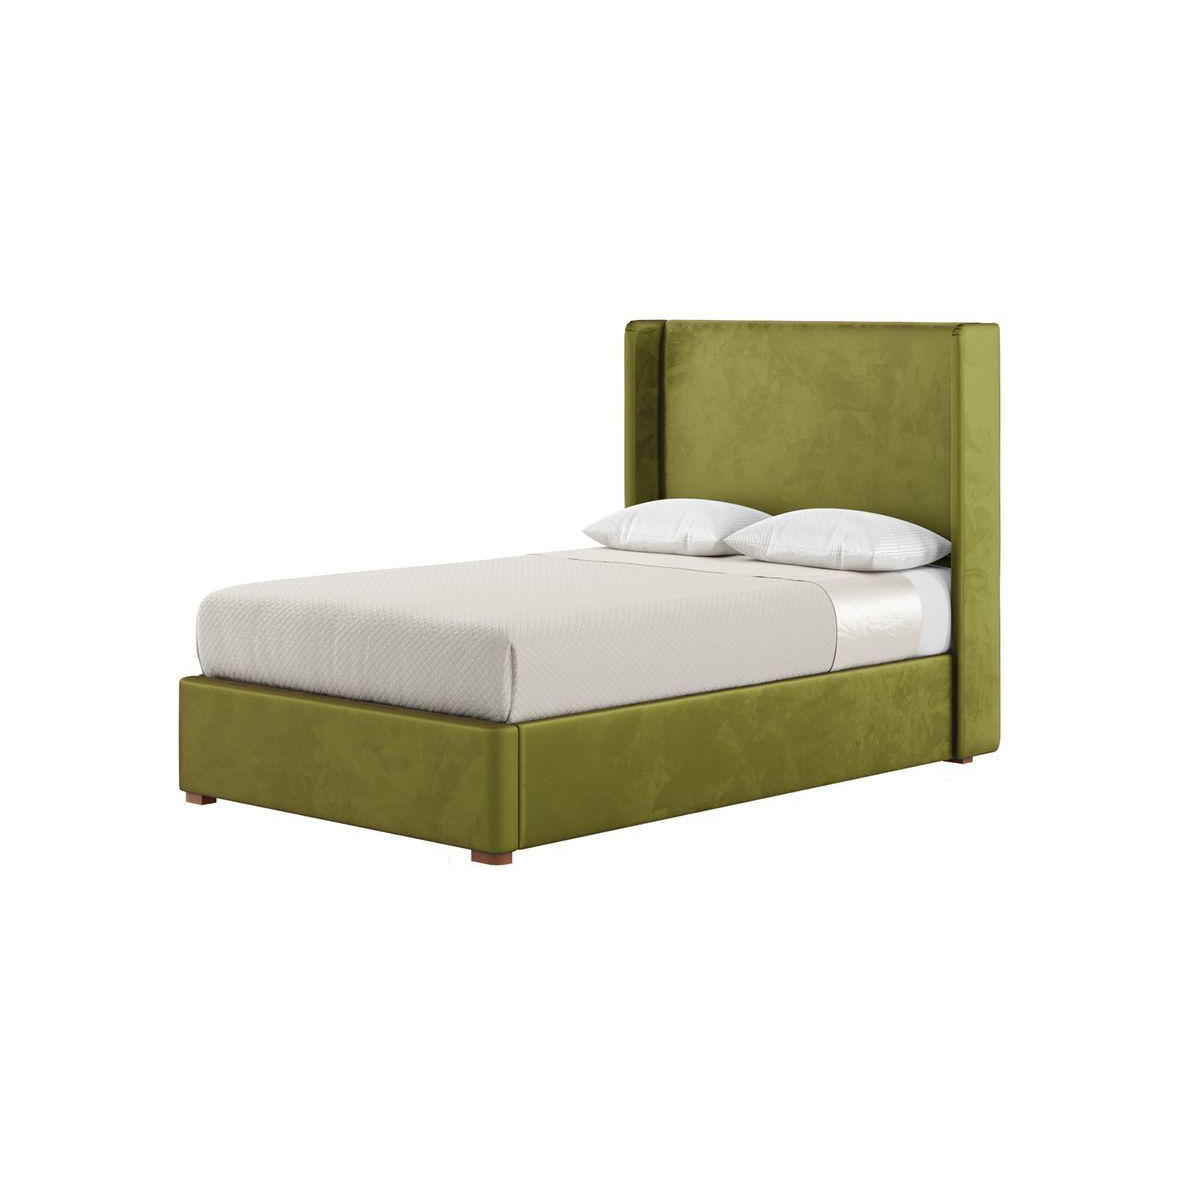 Darcy 4ft Small Double Bed Frame With Modern Smooth Wing Headboard, olive green, Leg colour: aveo - image 1